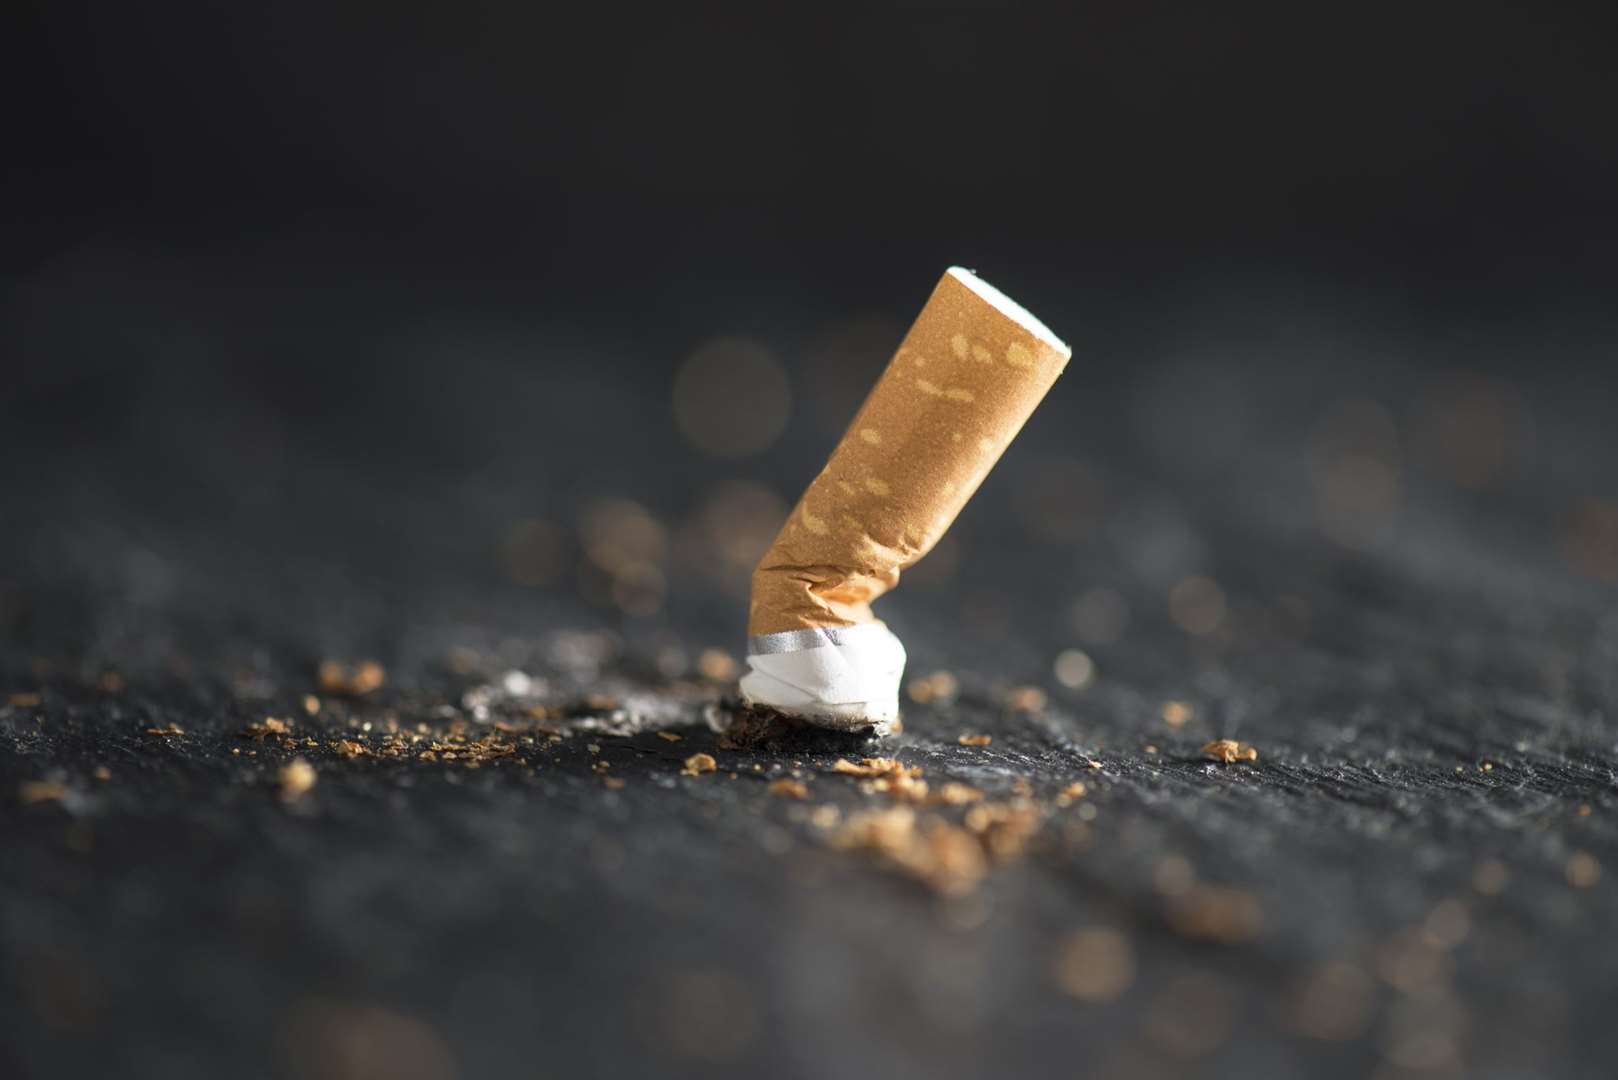 Dropping a cigarette butt can cost £150